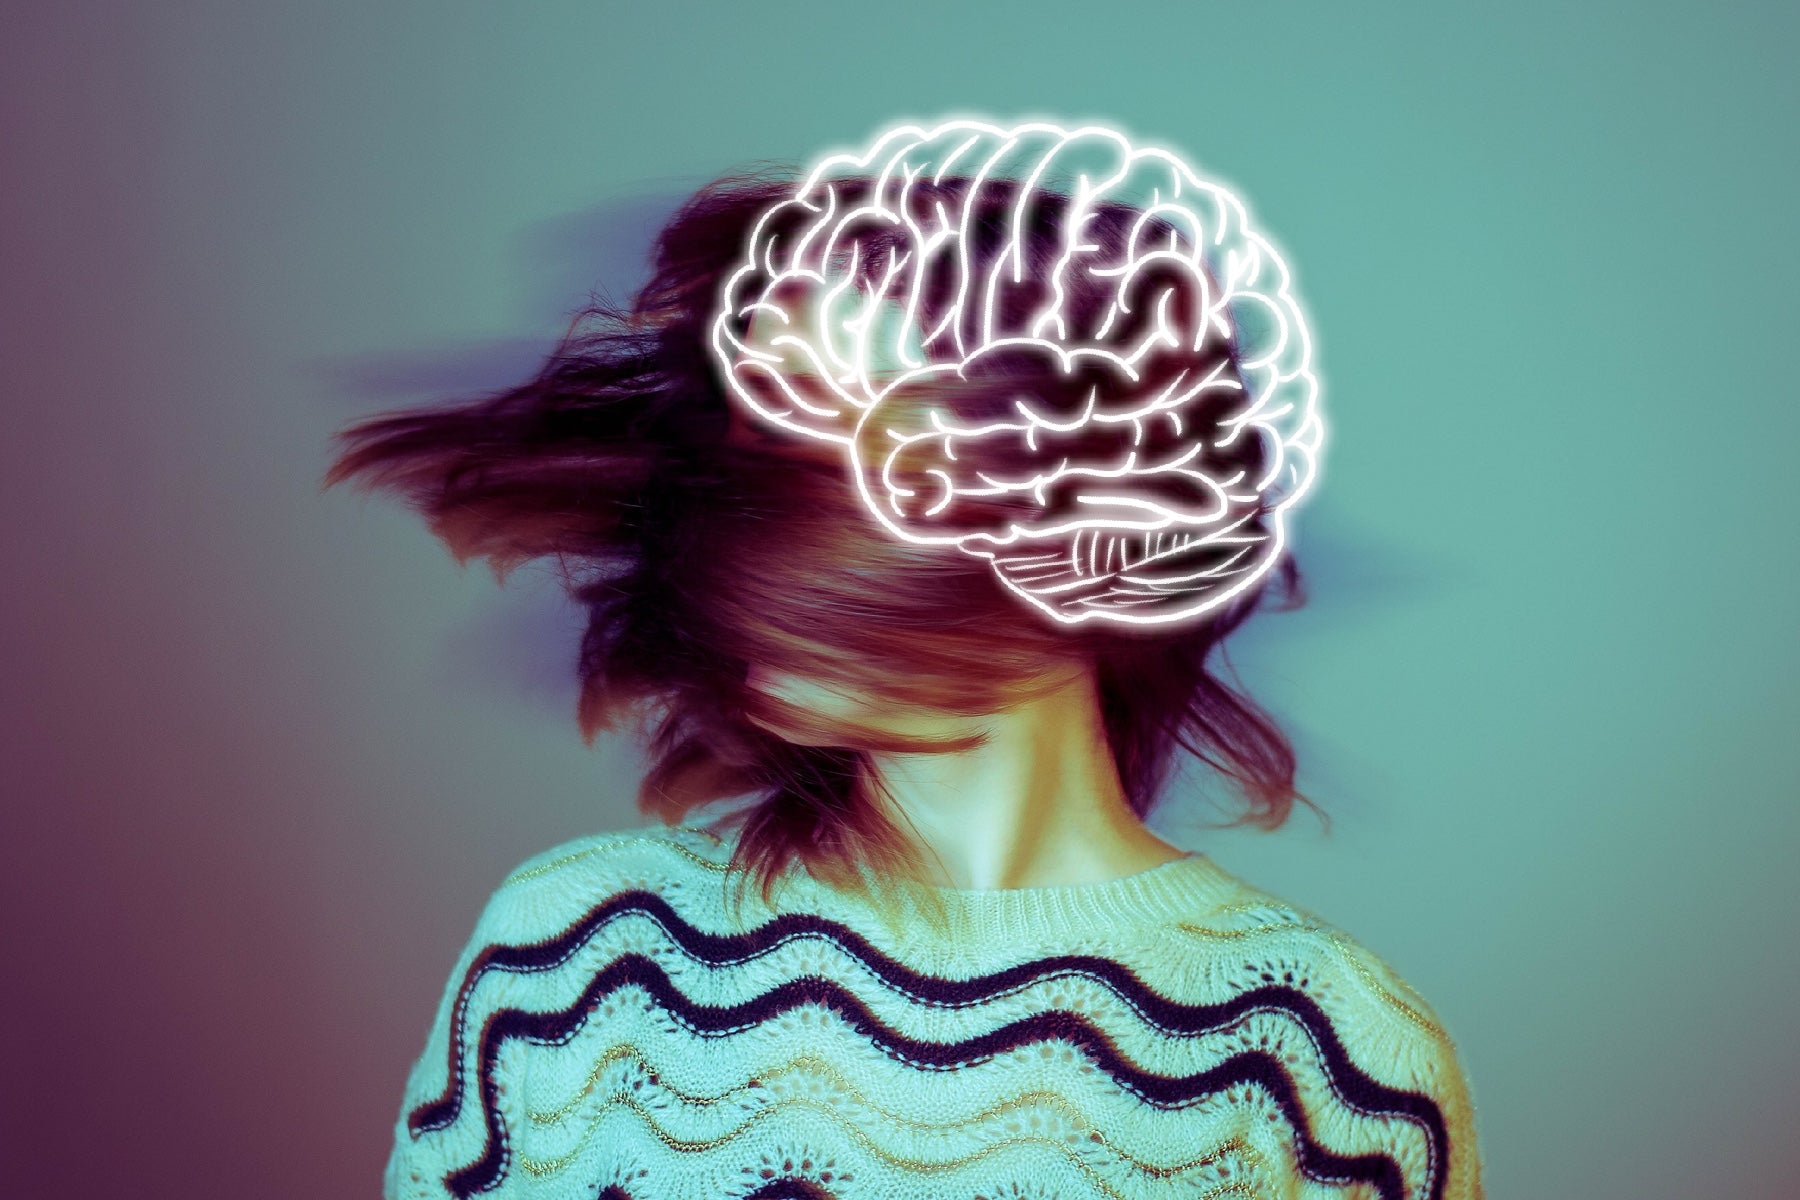 22 Thoughts About Life That Will Make Your Brain Glow